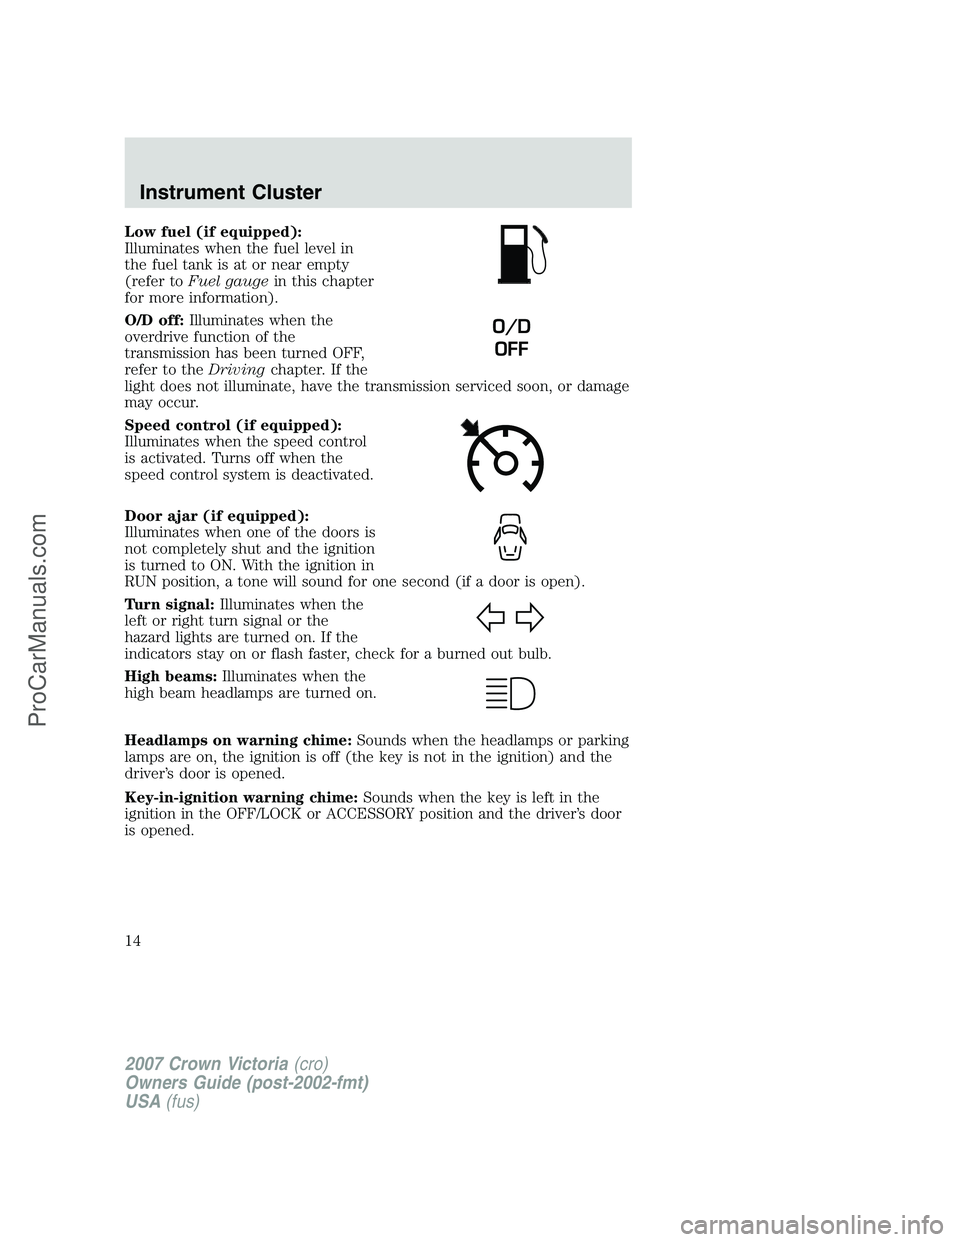 FORD E-450 2007  Owners Manual Low fuel (if equipped):
Illuminates when the fuel level in
the fuel tank is at or near empty
(refer toFuel gaugein this chapter
for more information).
O/D off:Illuminates when the
overdrive function o